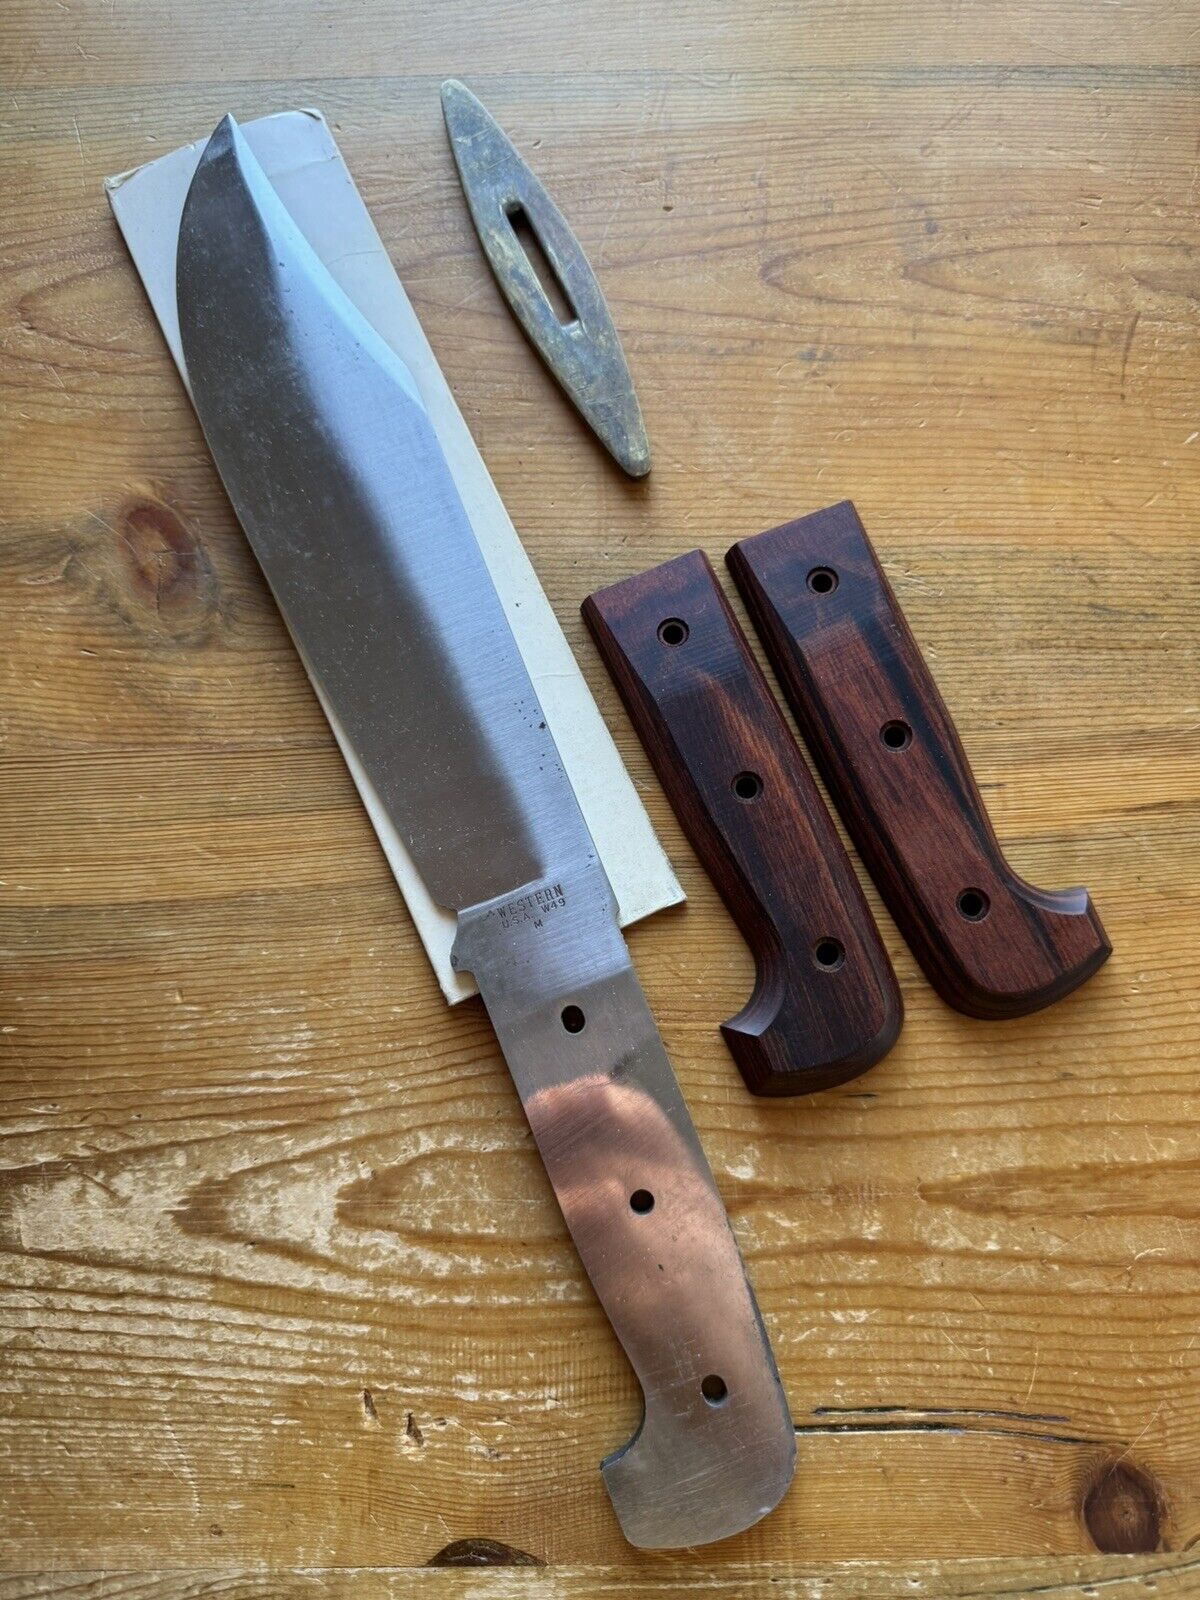 NOS Vntg Western W49 Bowie Kit - Blade, Guard And Handle Scales 